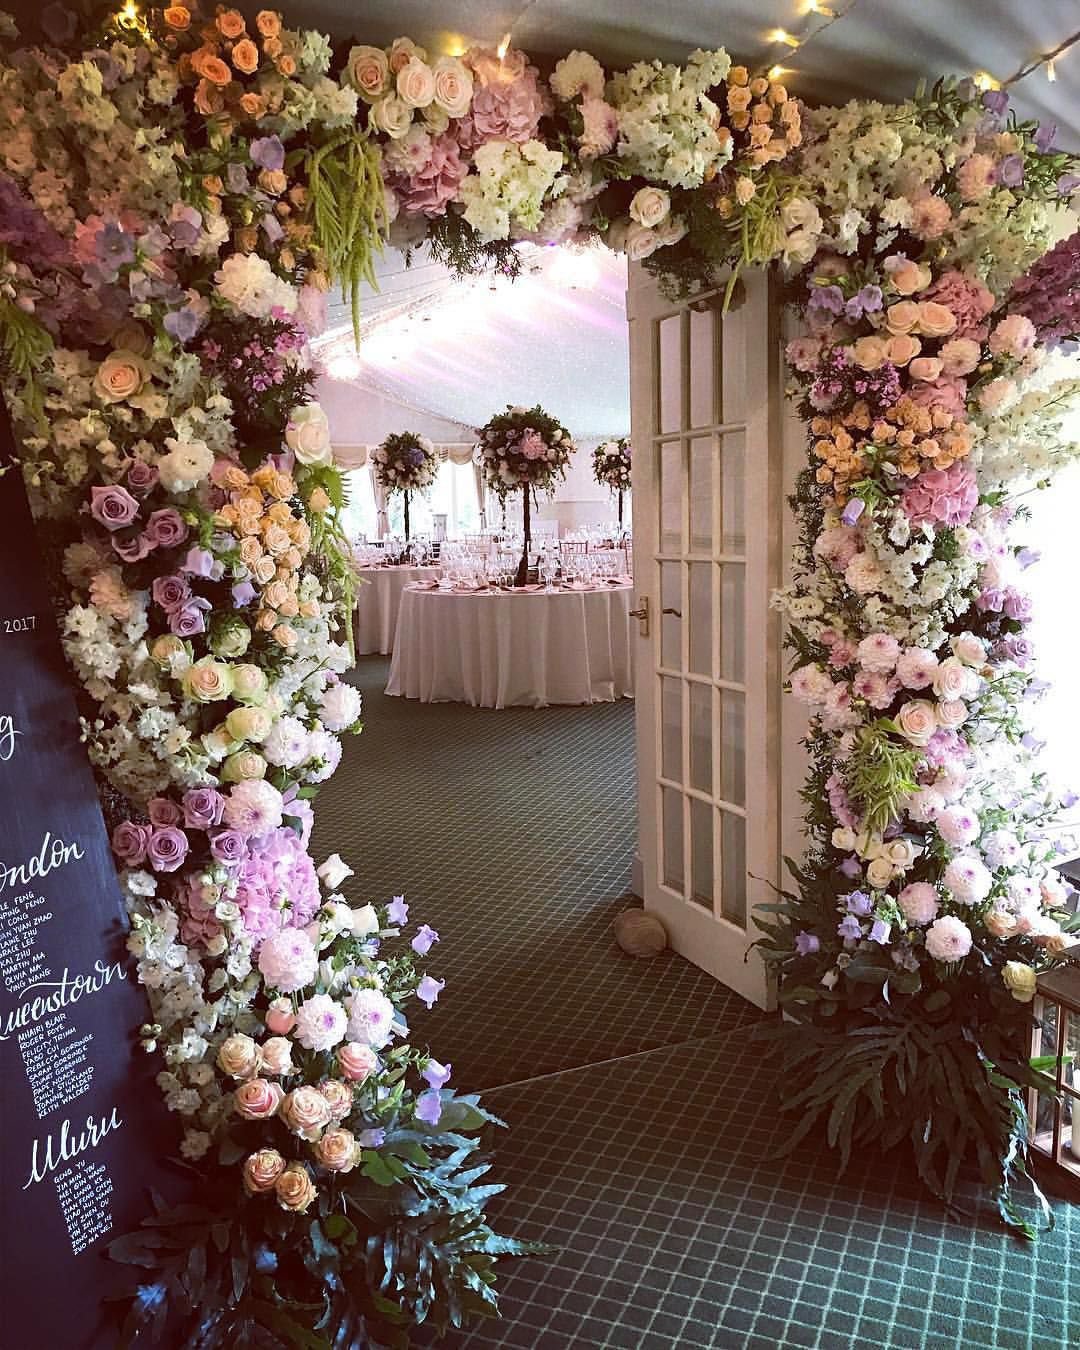 must have wedding photos flowered arch in the wedding reception planet flowers